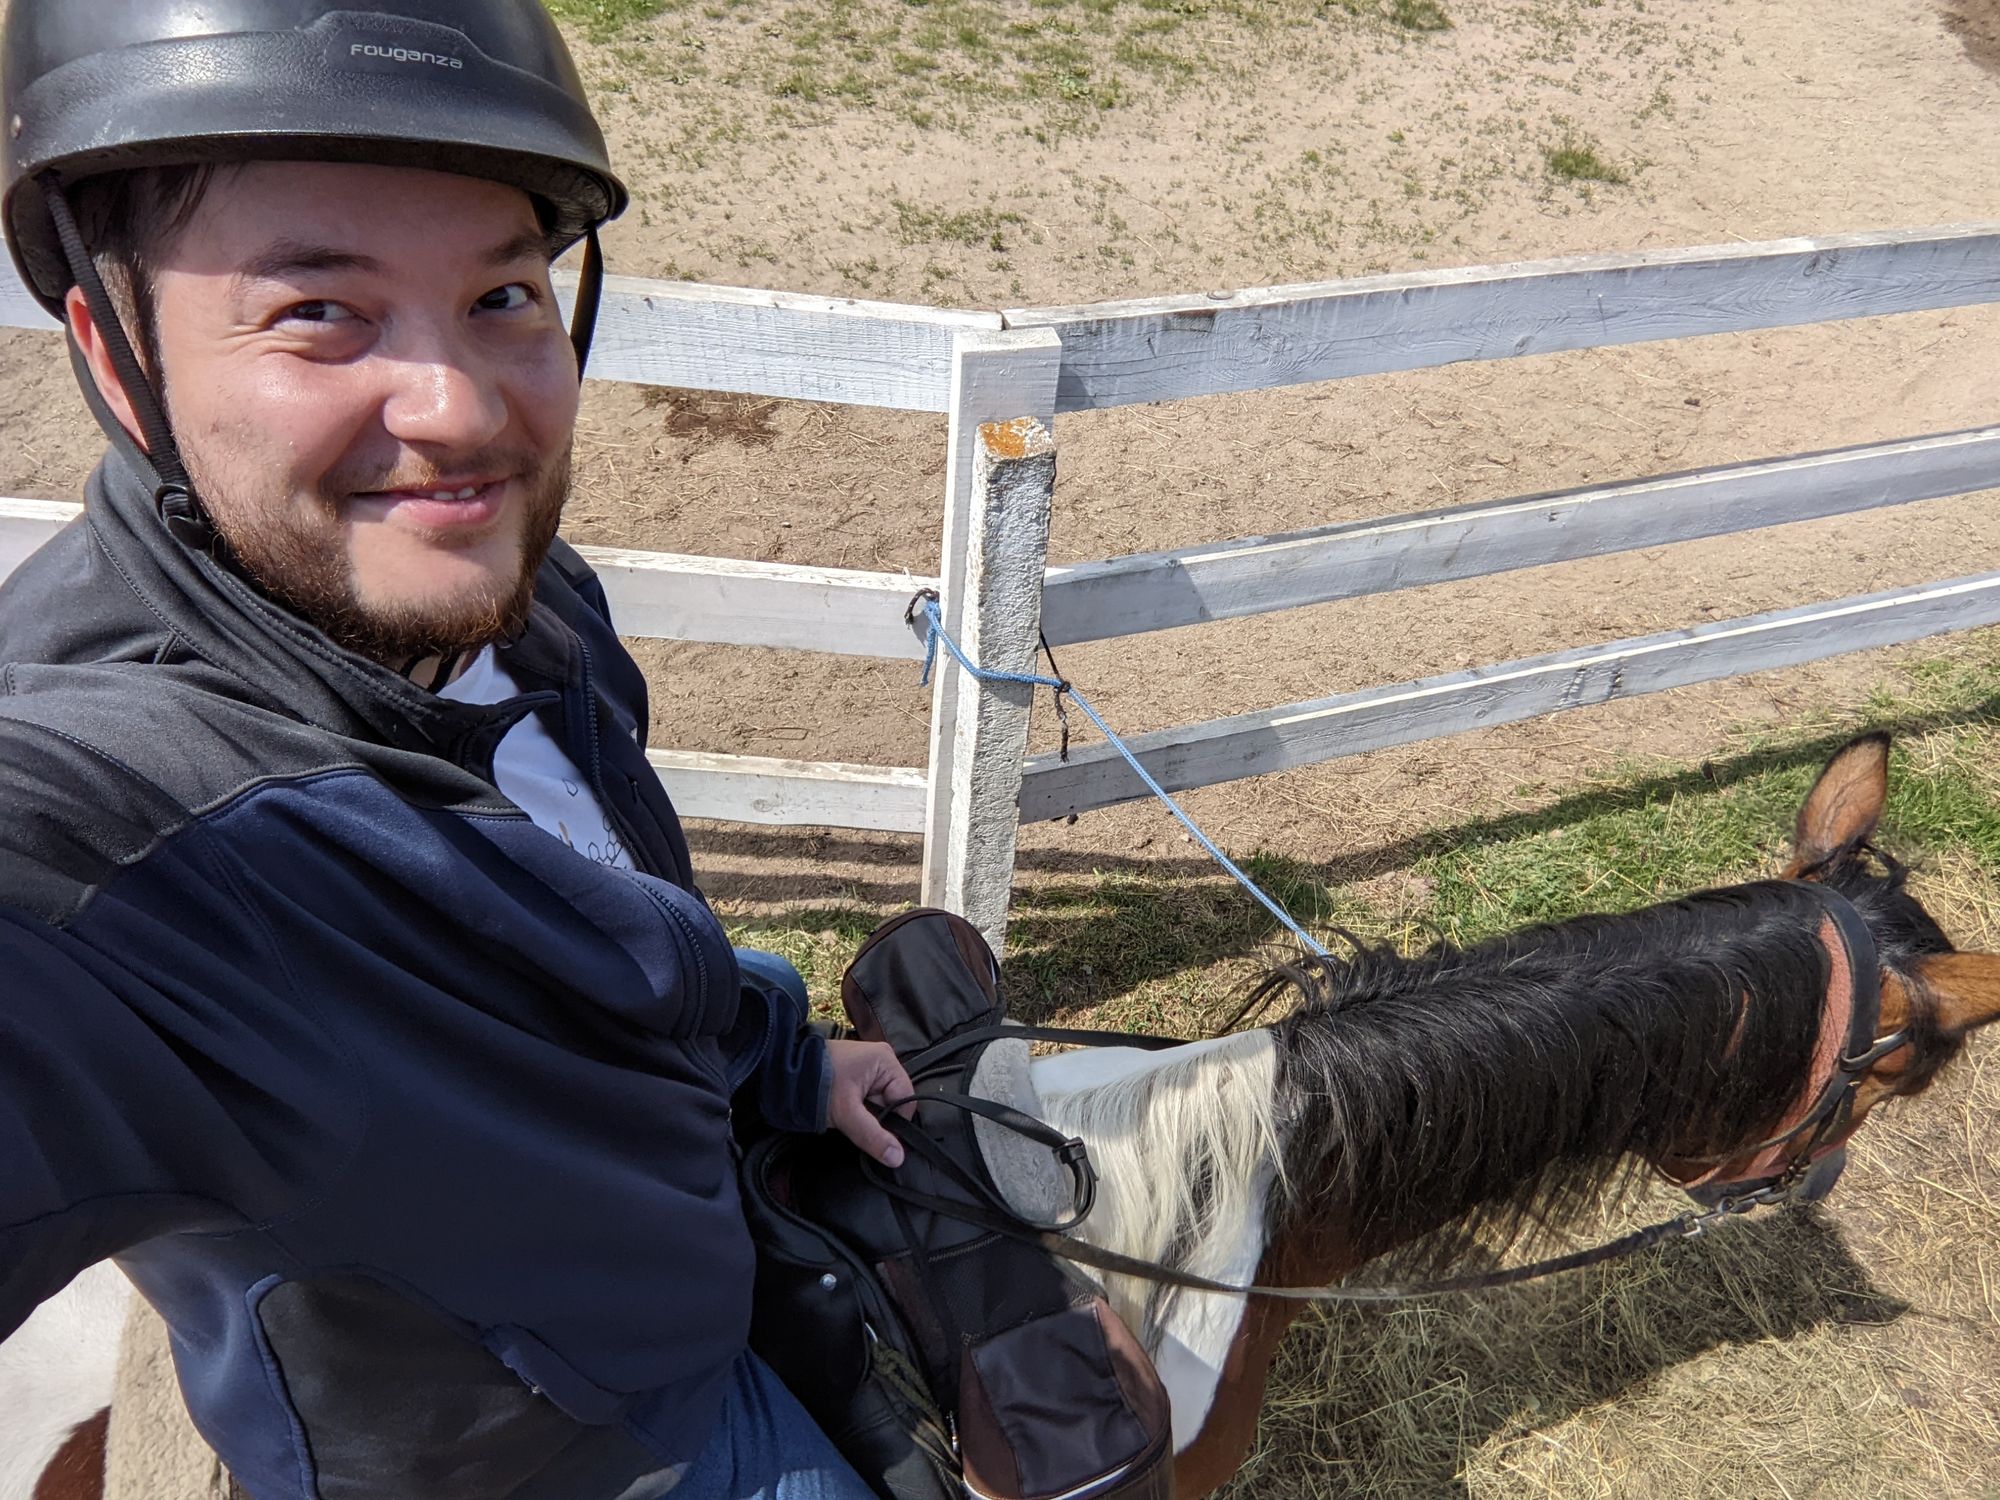 Roland tries new things: Horse riding